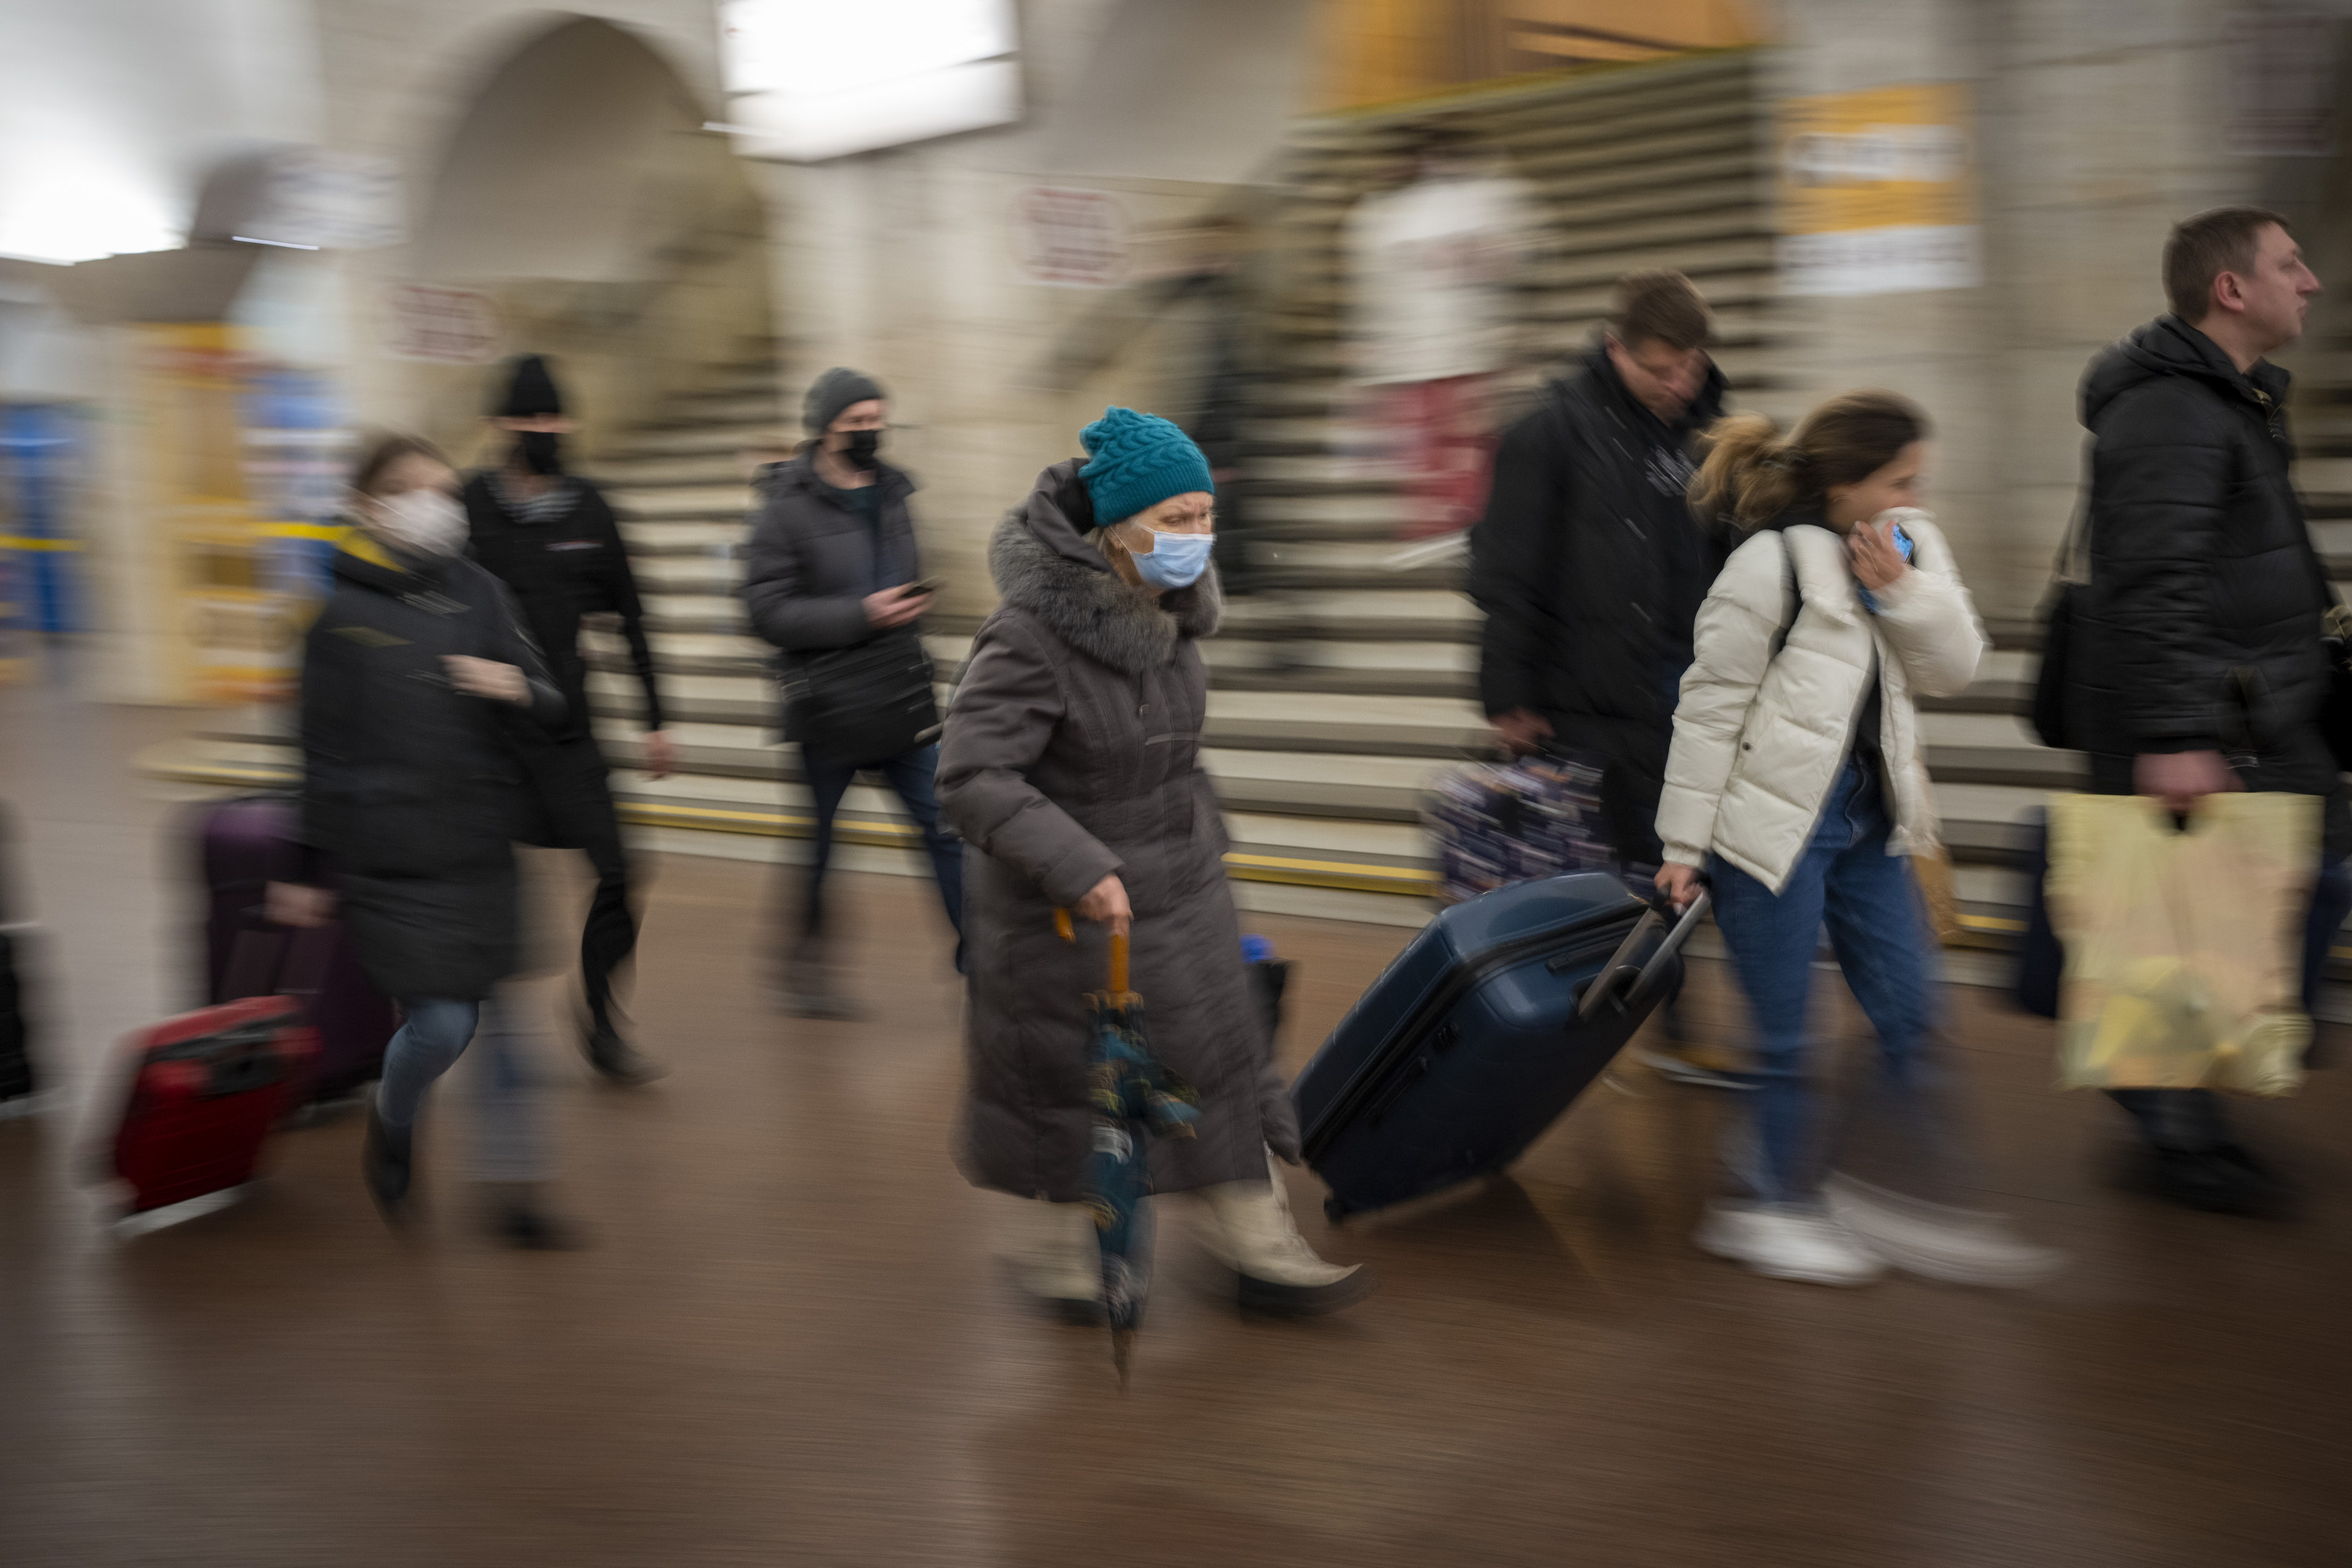 A blurry photo of people walking through the station with luggage